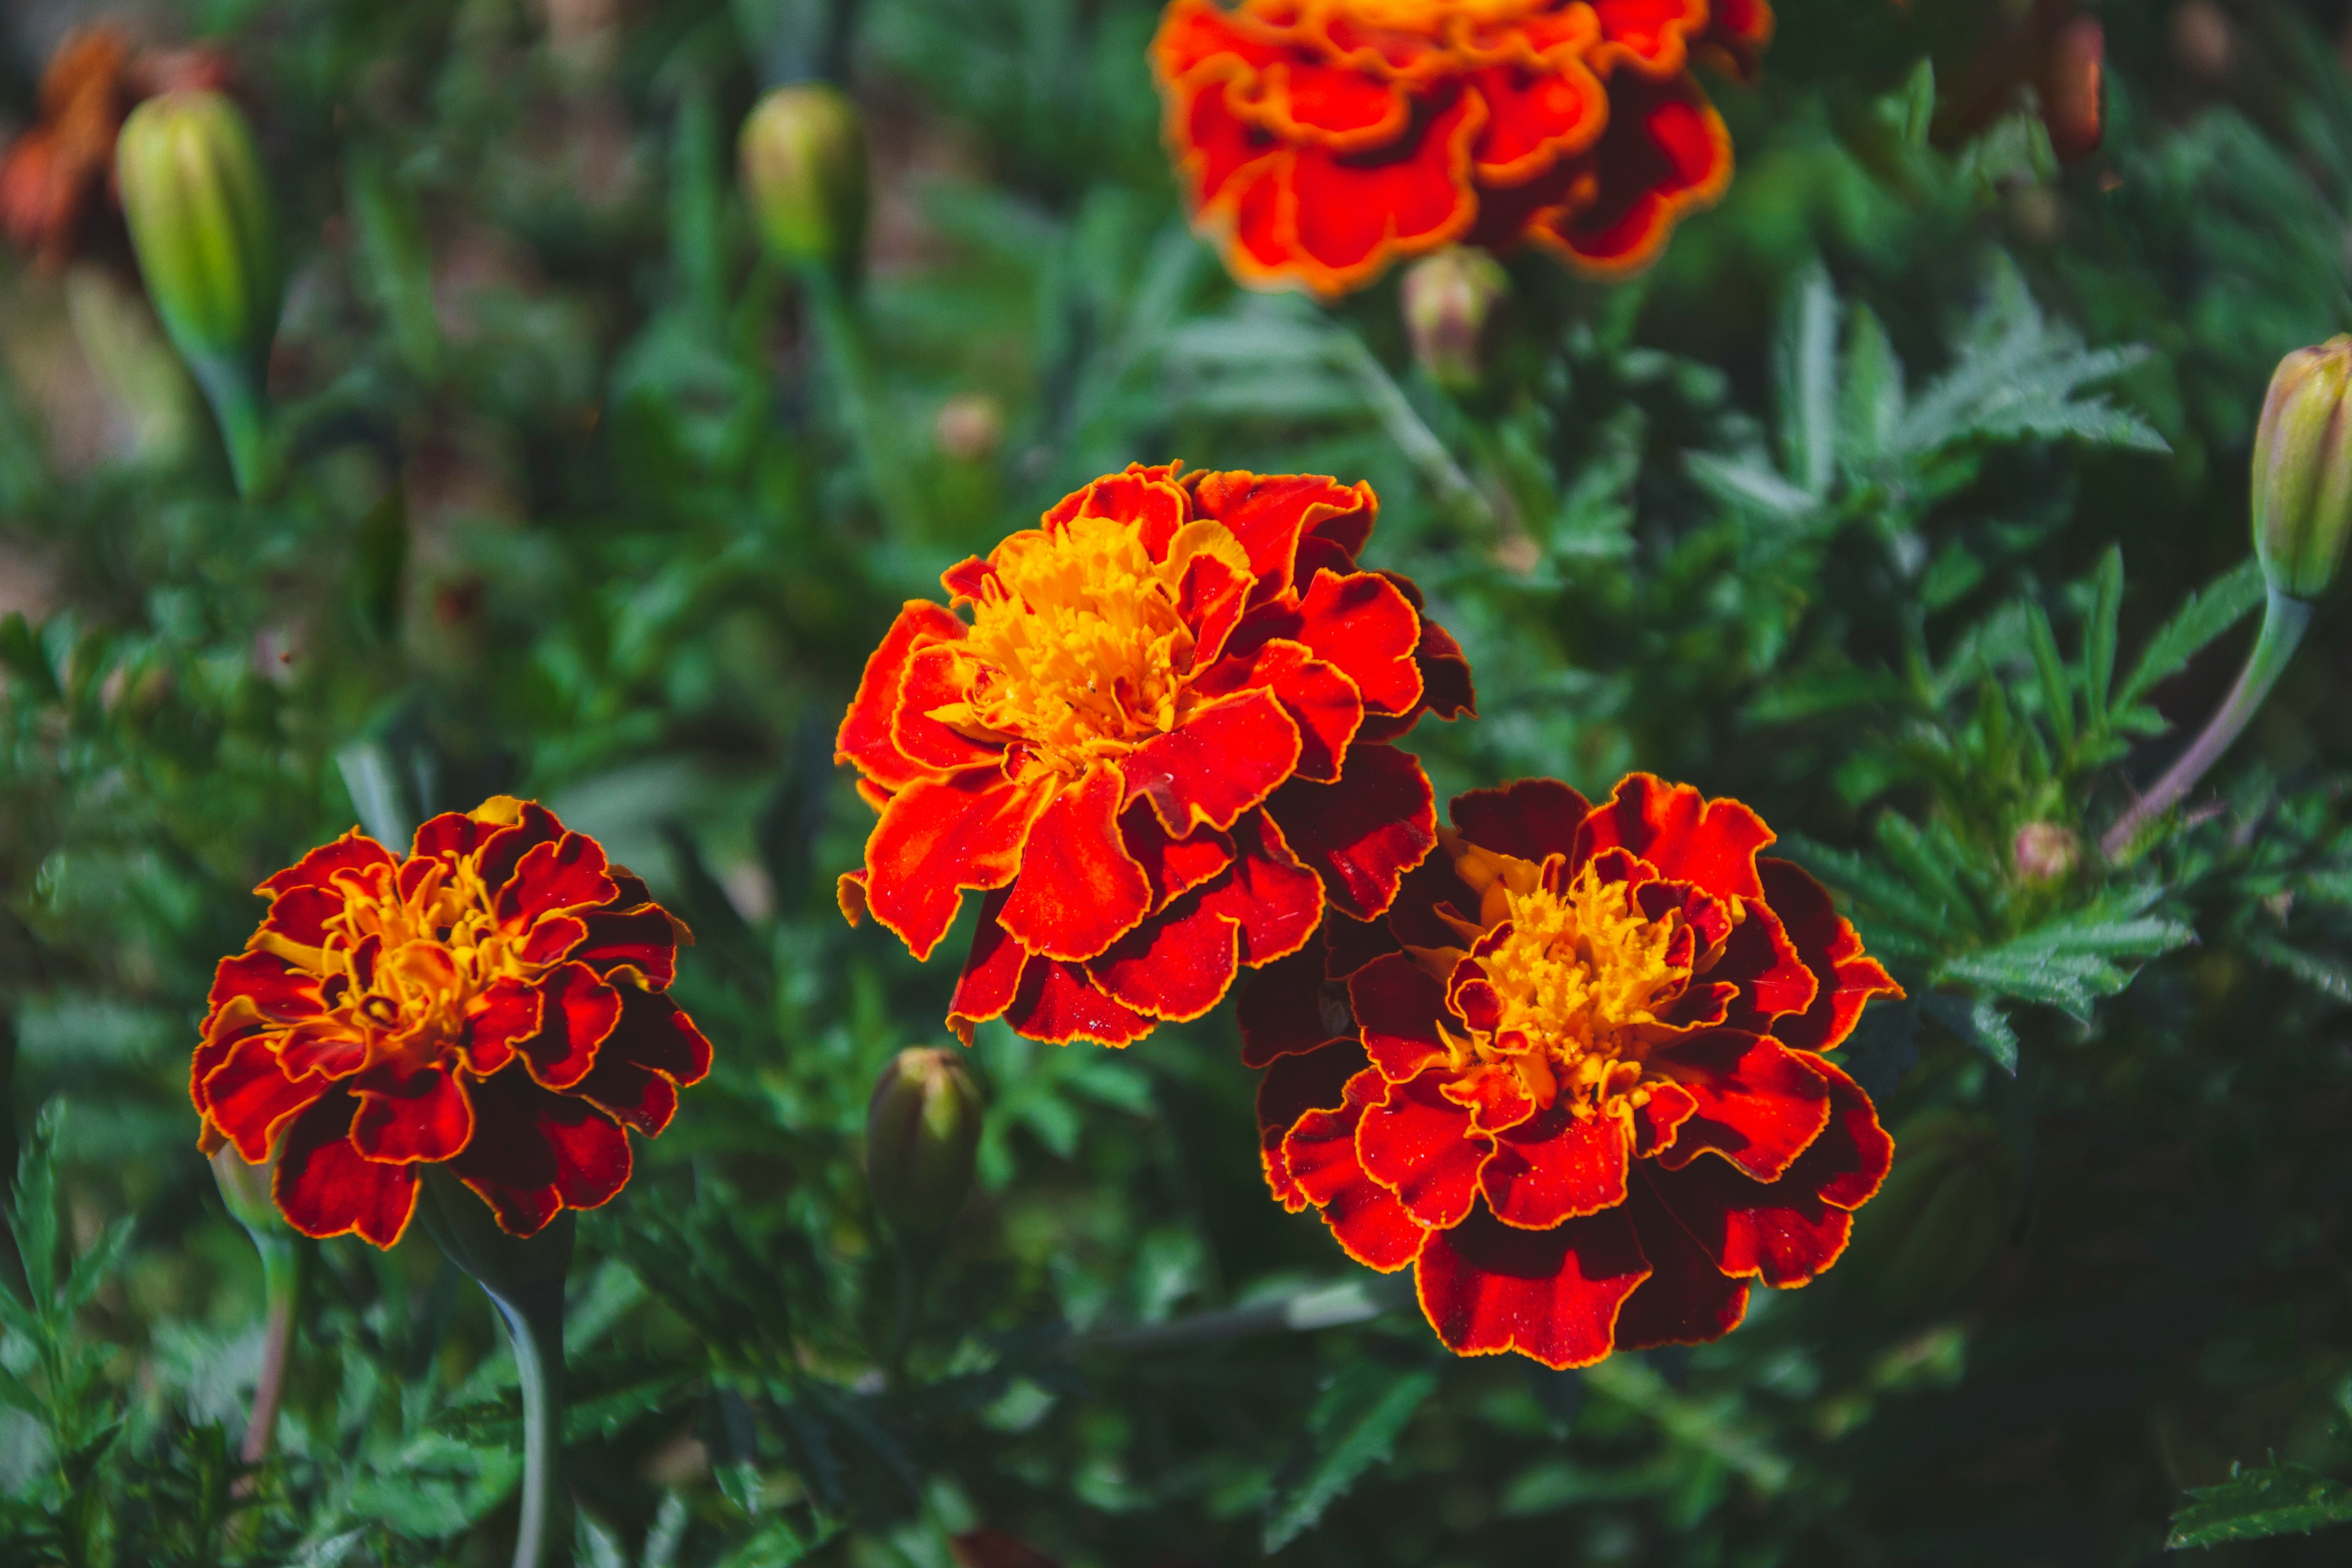 Marigold flowers repel a wide variety of insect pests and attract pollinators.